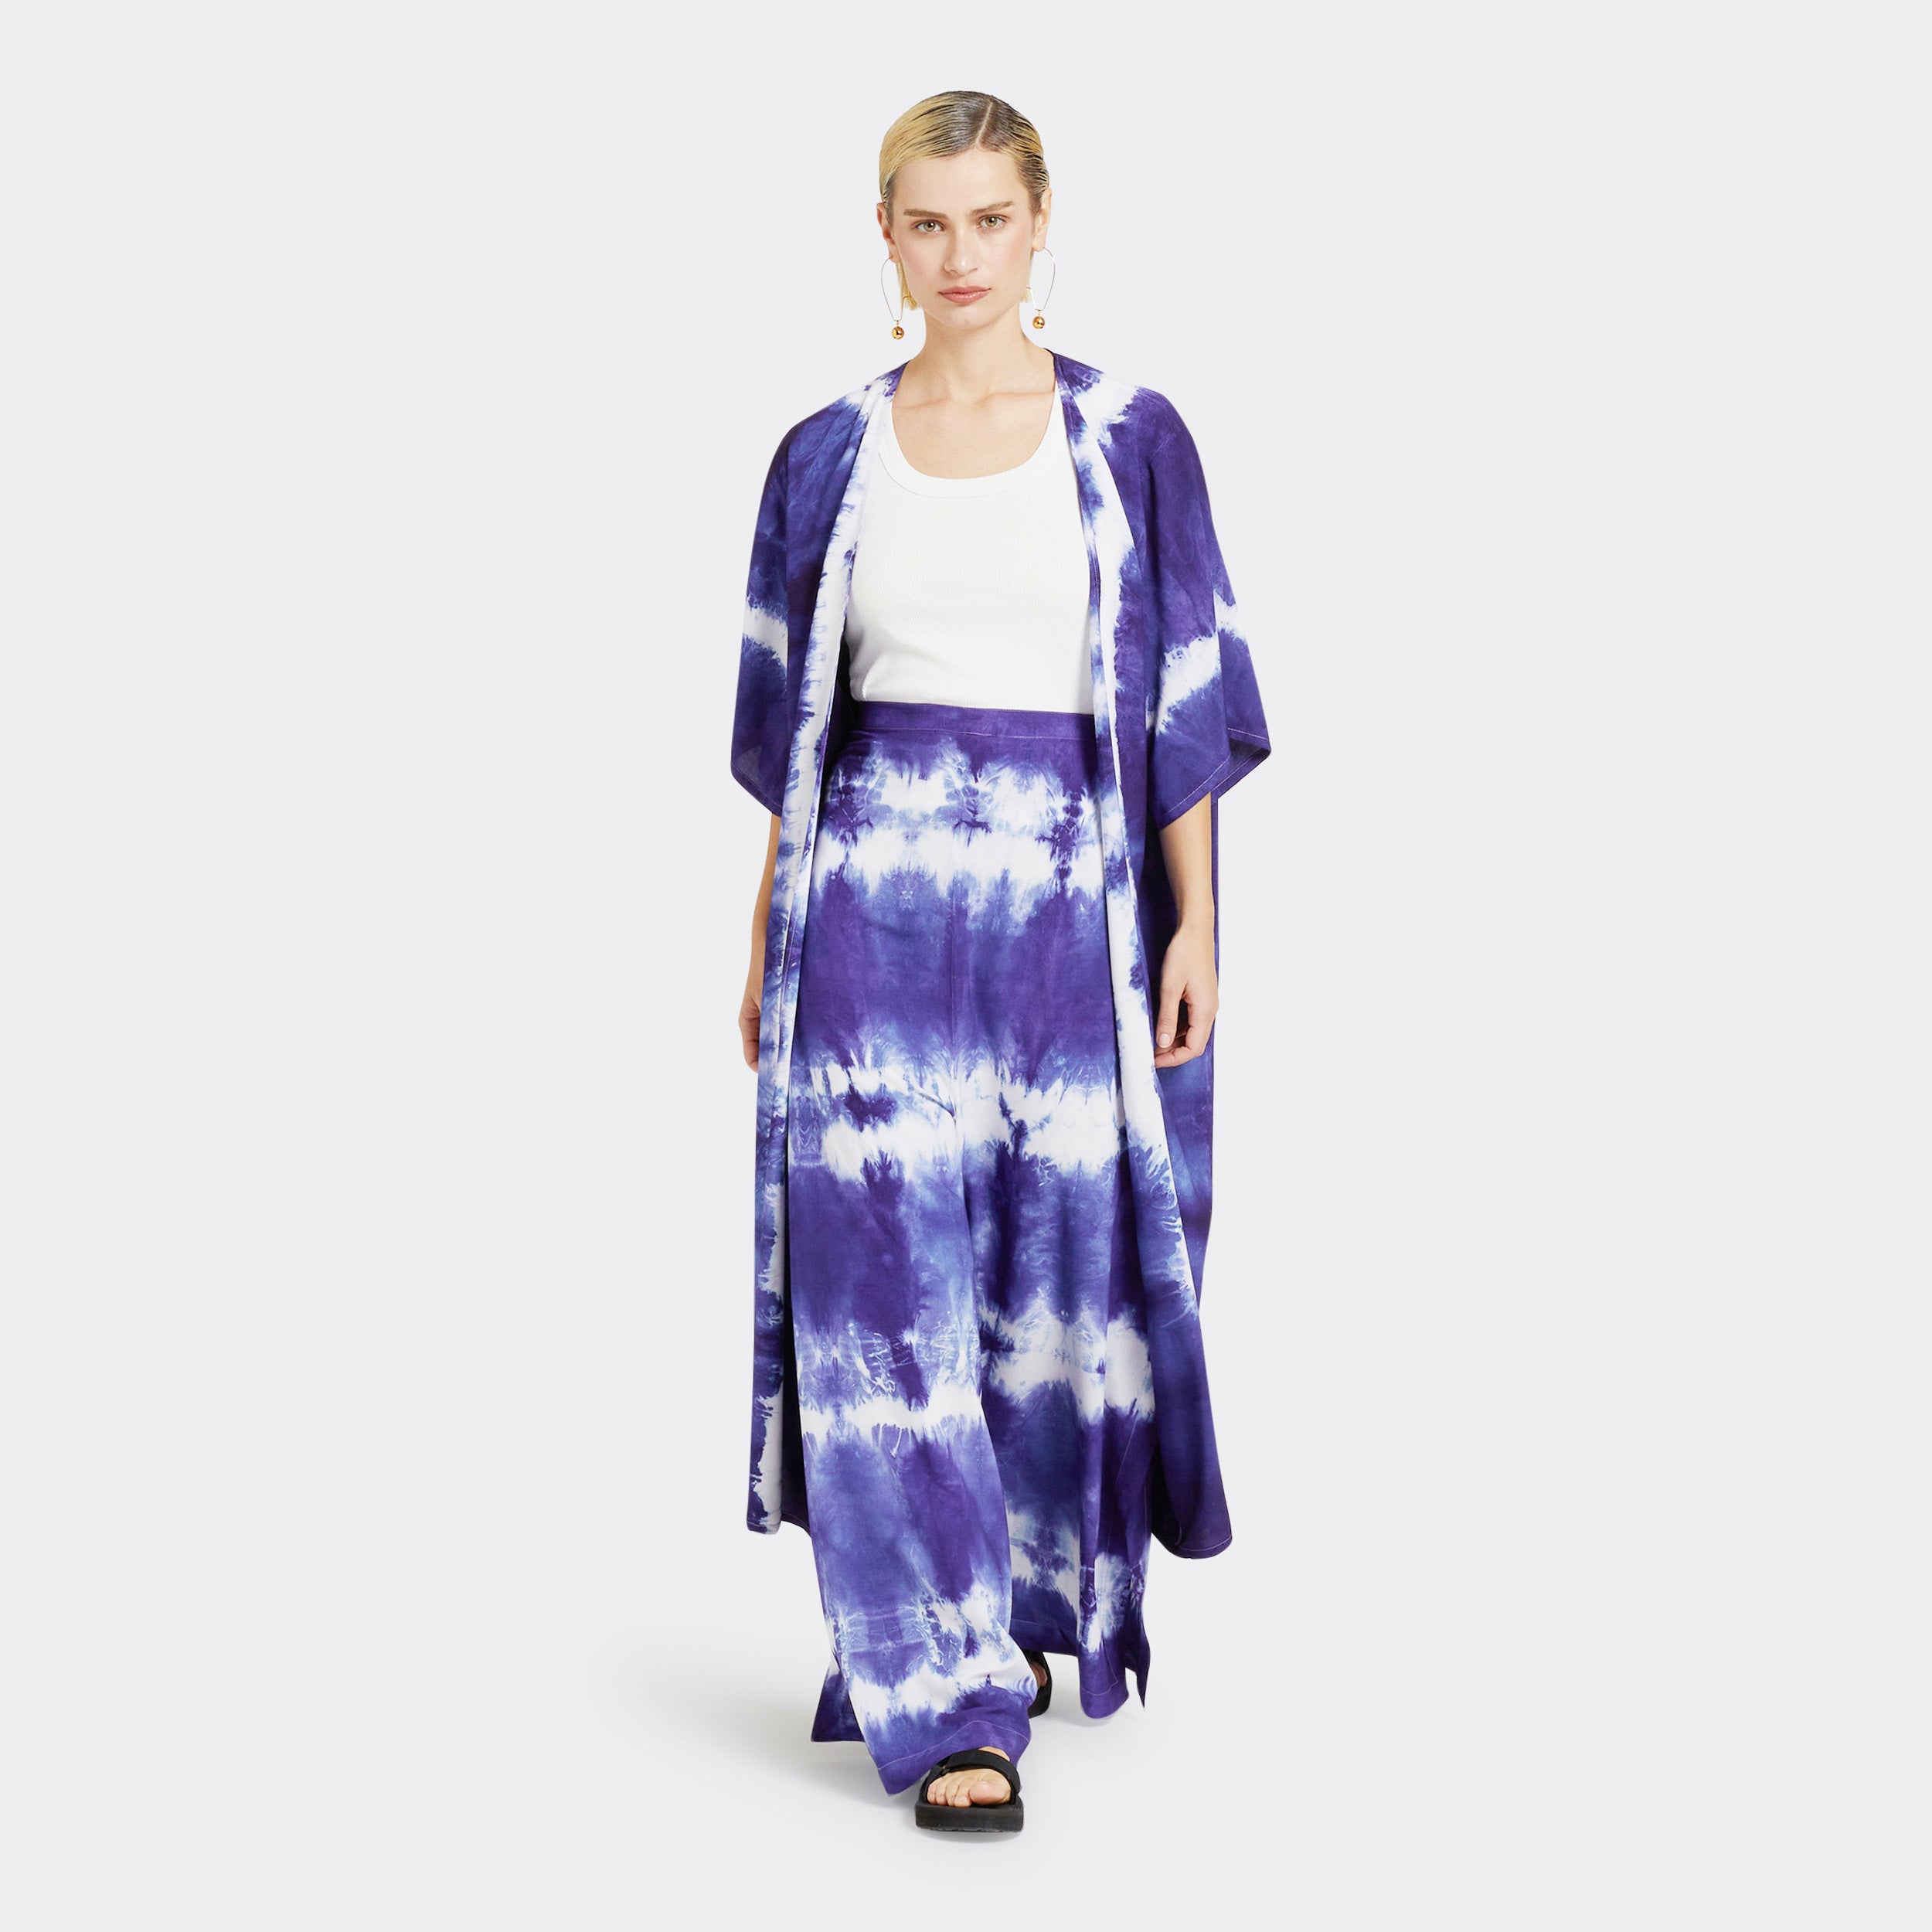 Model wears Wrap Trousers in Tie Dye Soft Blue with a plain white top and a Kimono in Tie Dye Soft Blue.